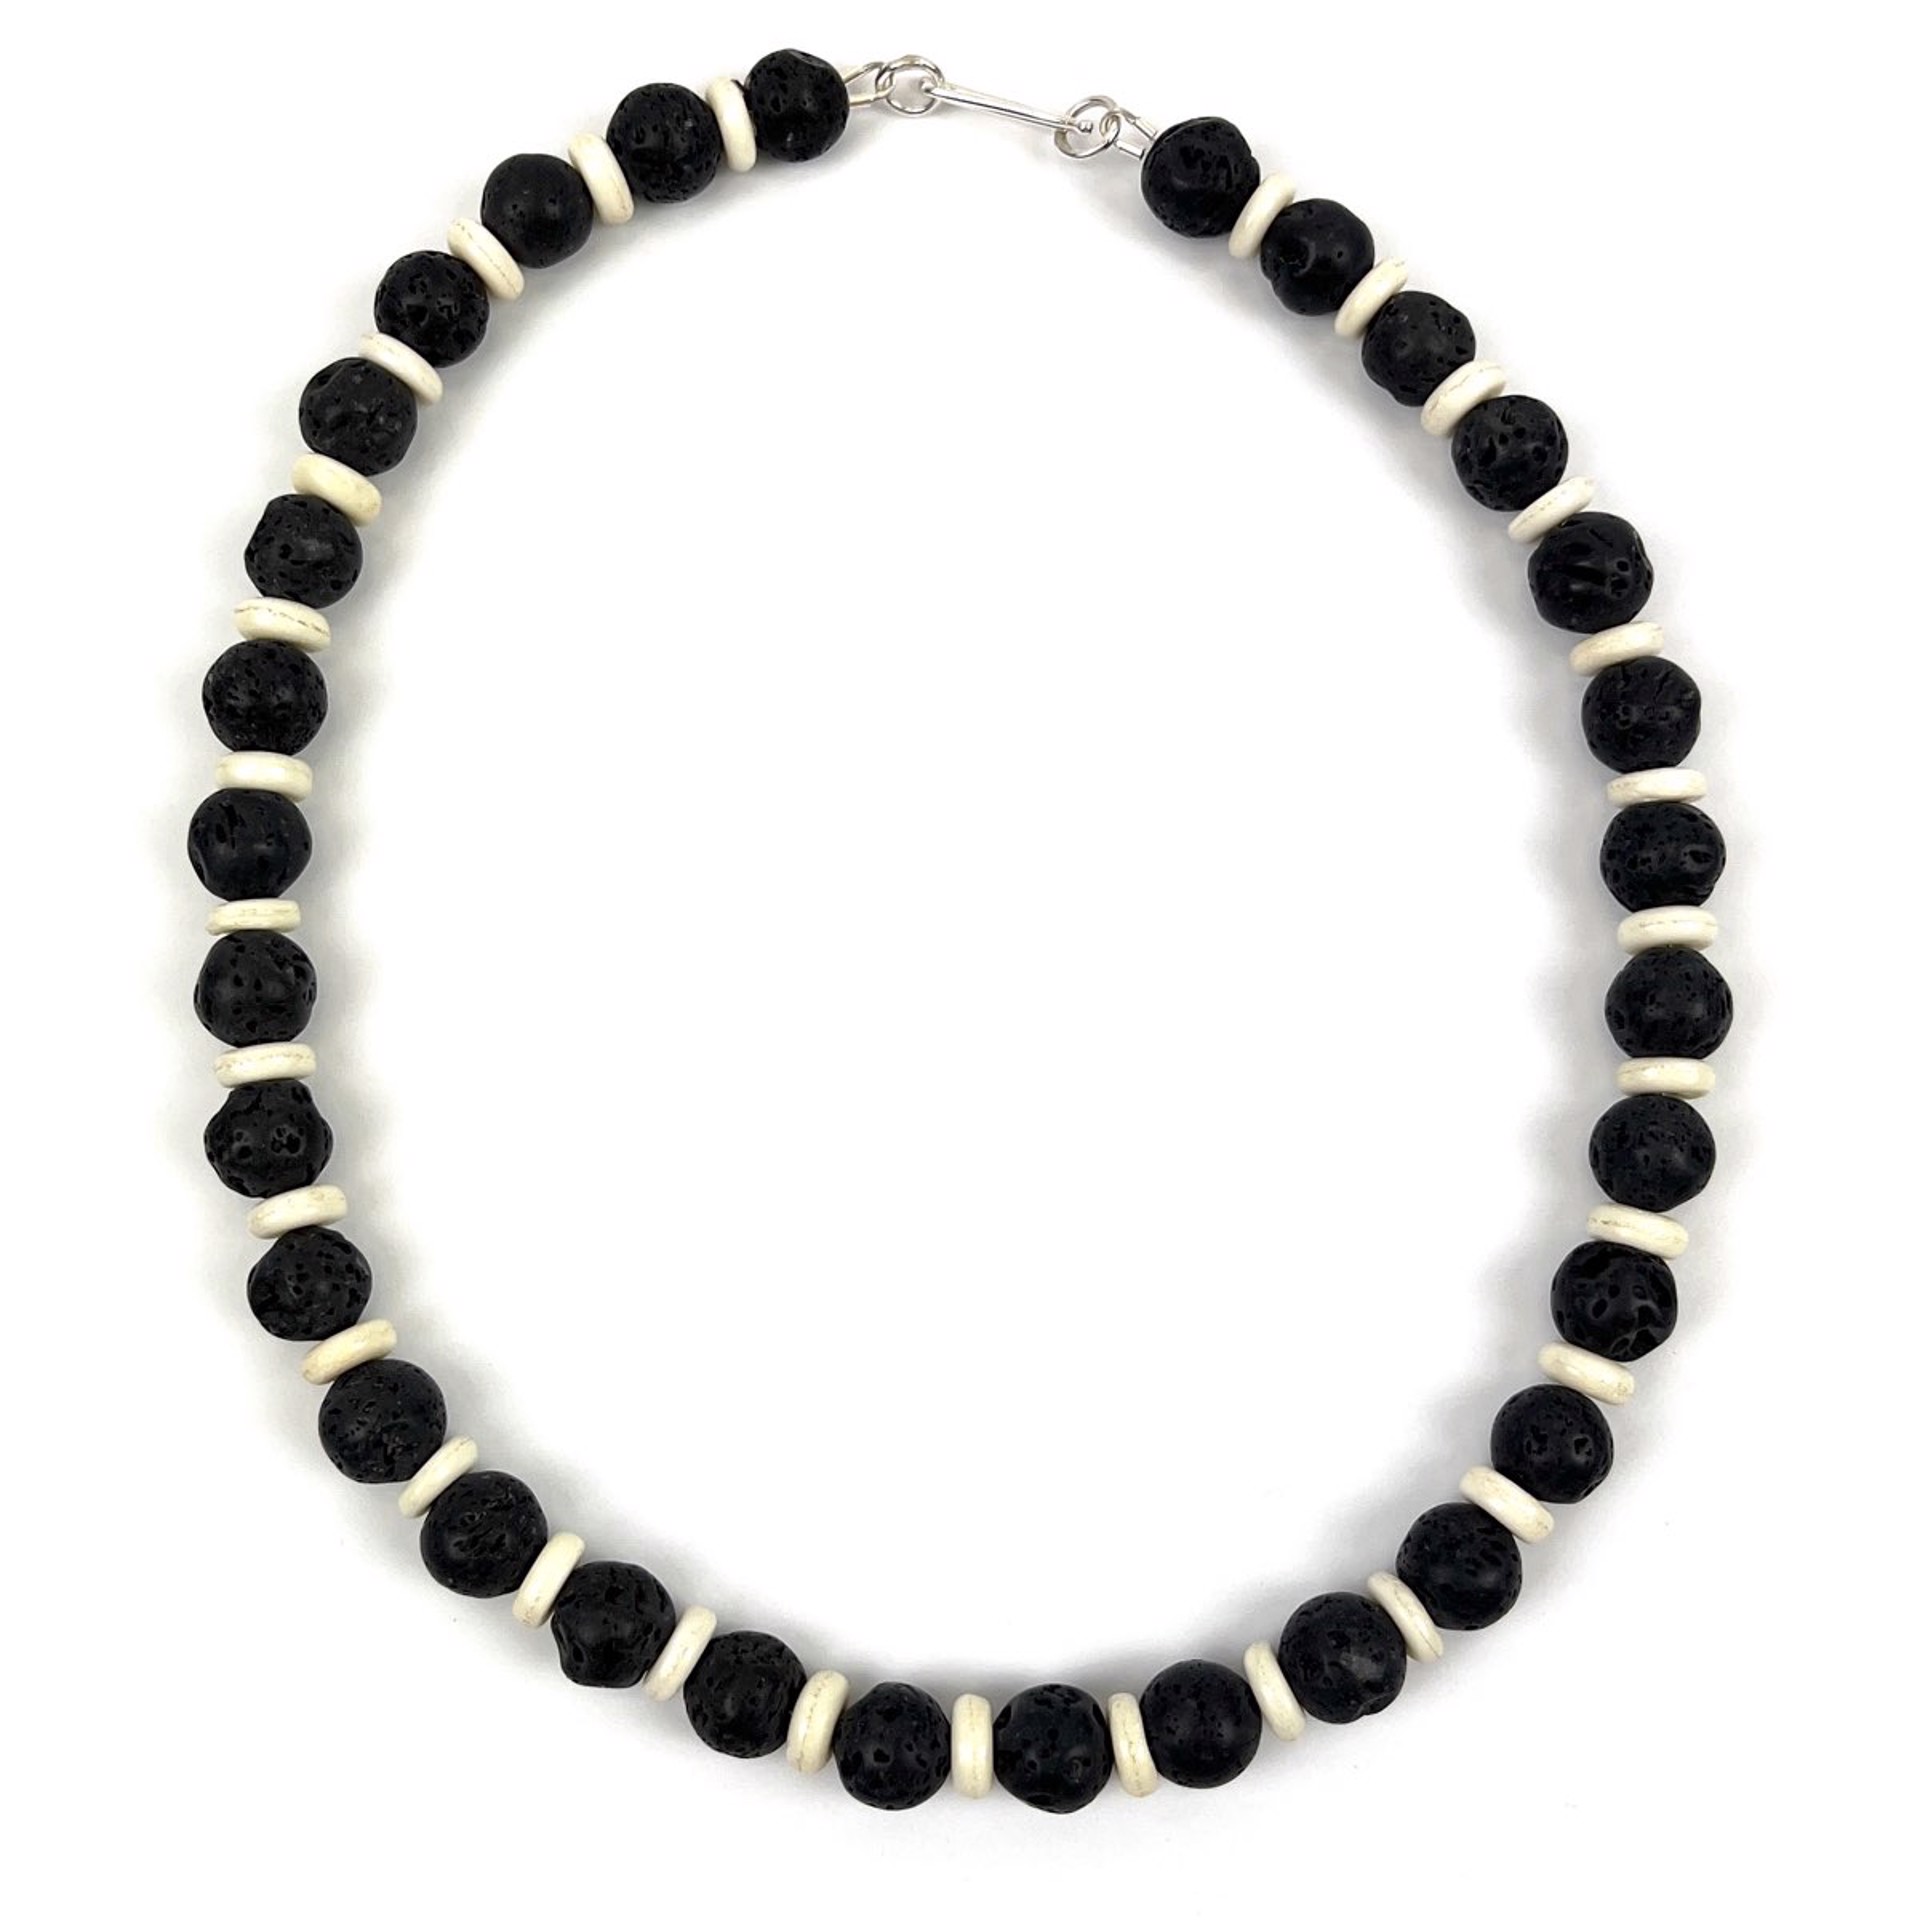 Lava and Bone Bead Necklace by Anne Rob